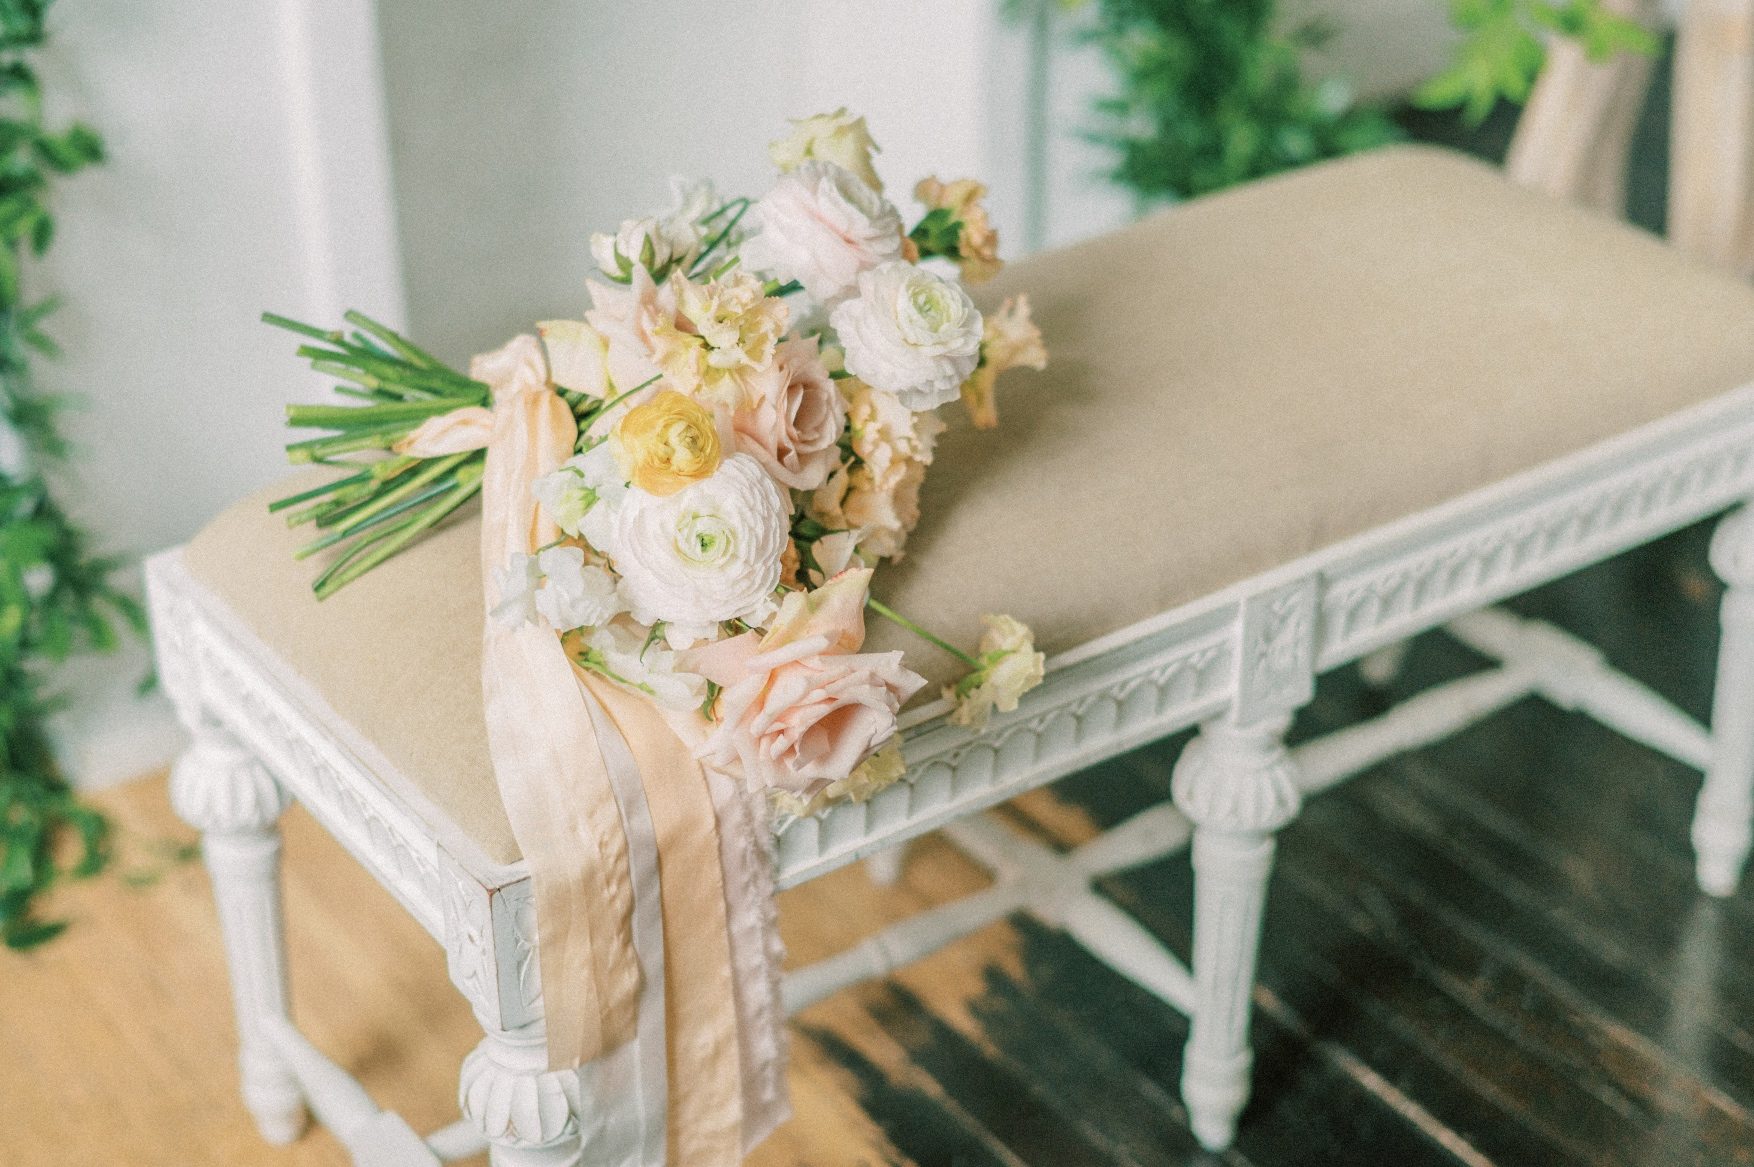 A Calyx Floral Design bridal bouquet in peach, blush and white sitting on a bench with silk stem wrap draping over the side